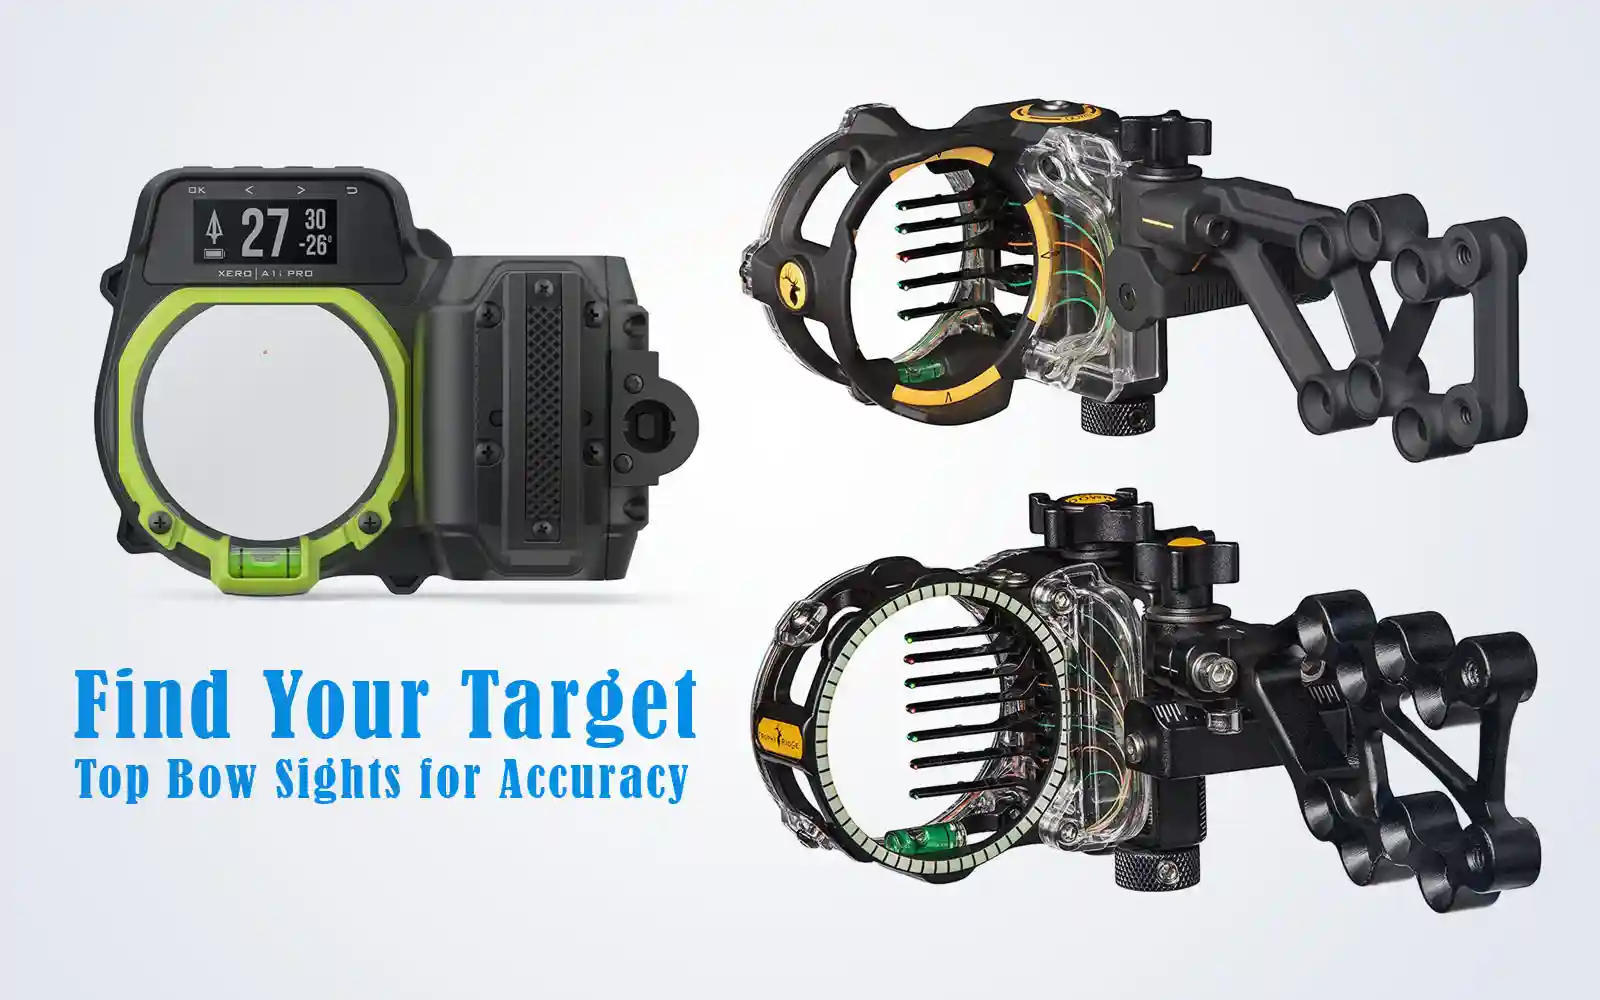 Sights Set on Success: Top Best Bow Sights for Hunting and Archery